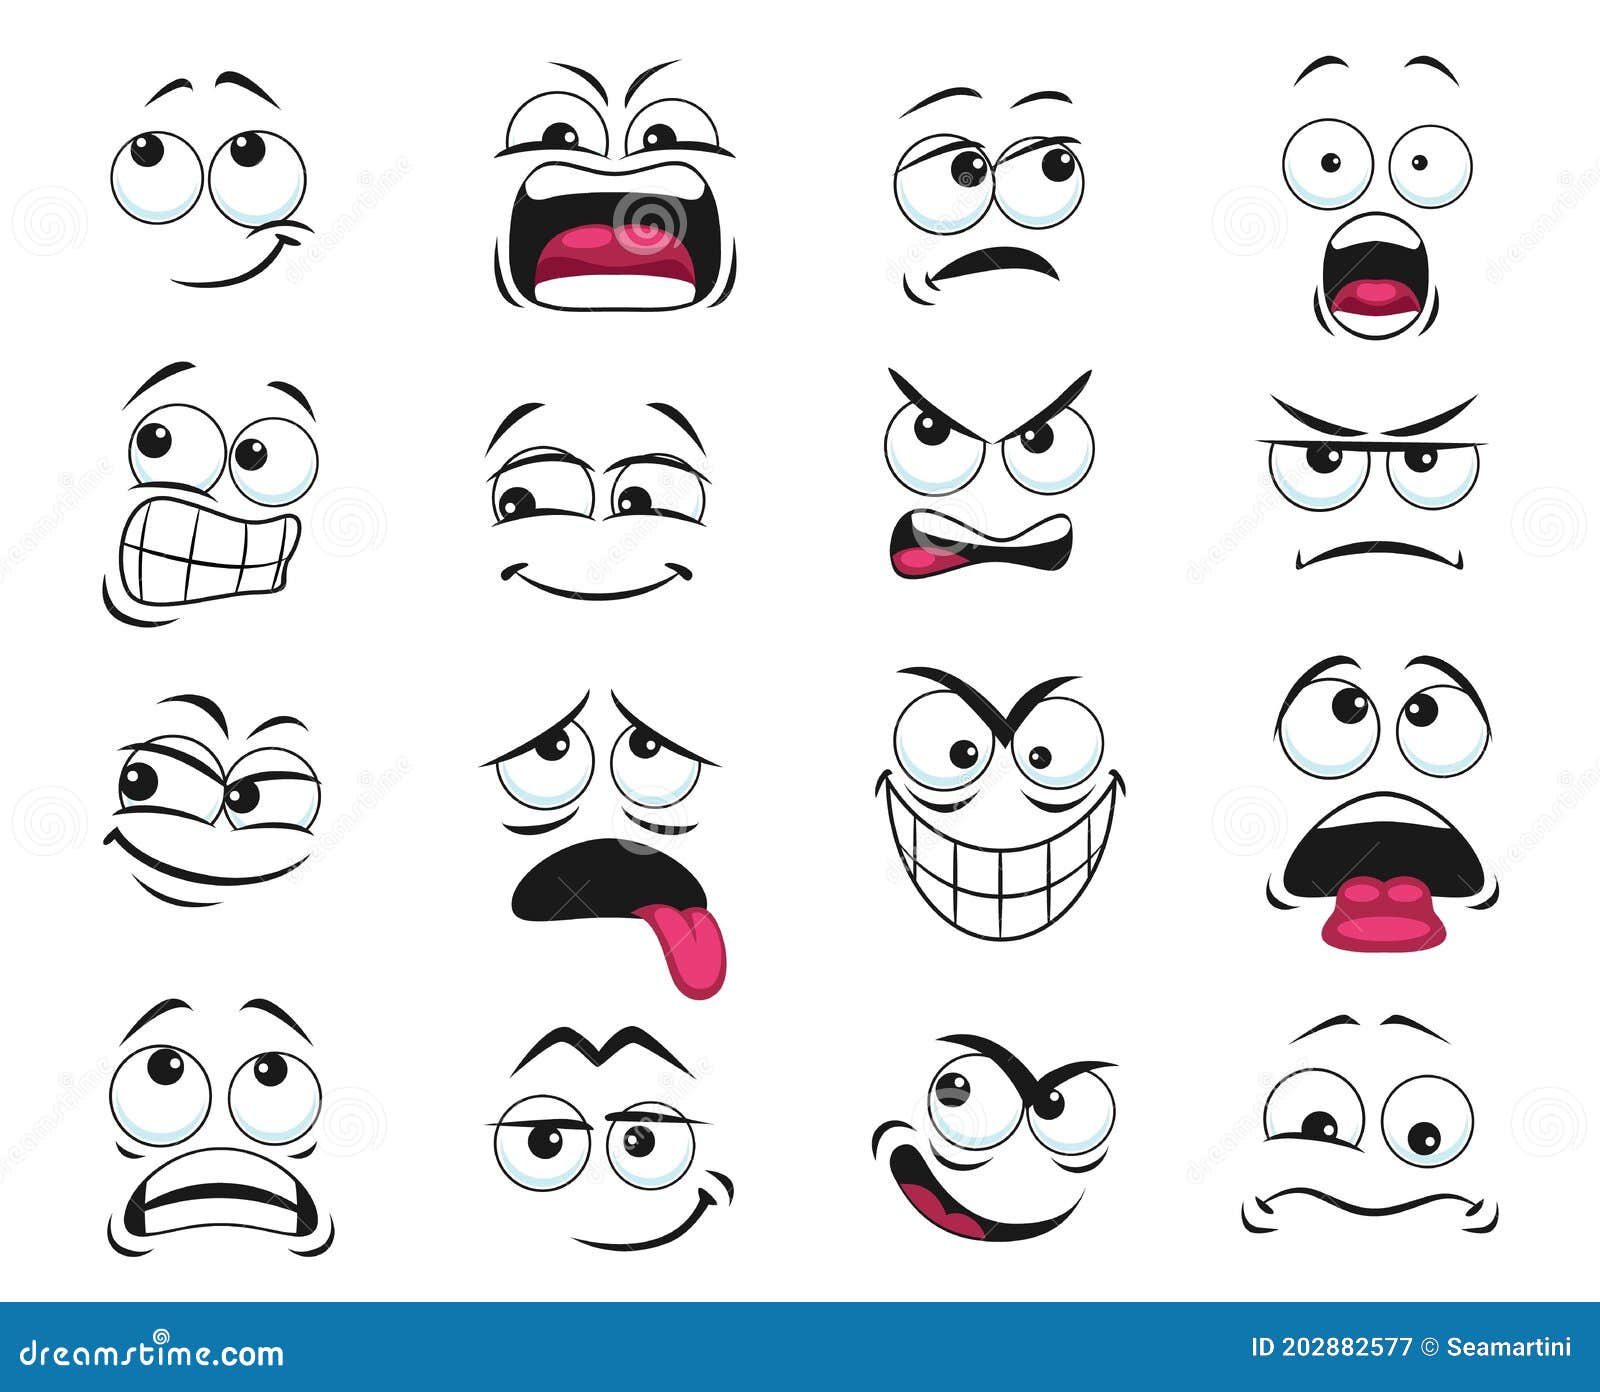 Scared Face Cartoon Stock Illustrations, Cliparts and Royalty Free